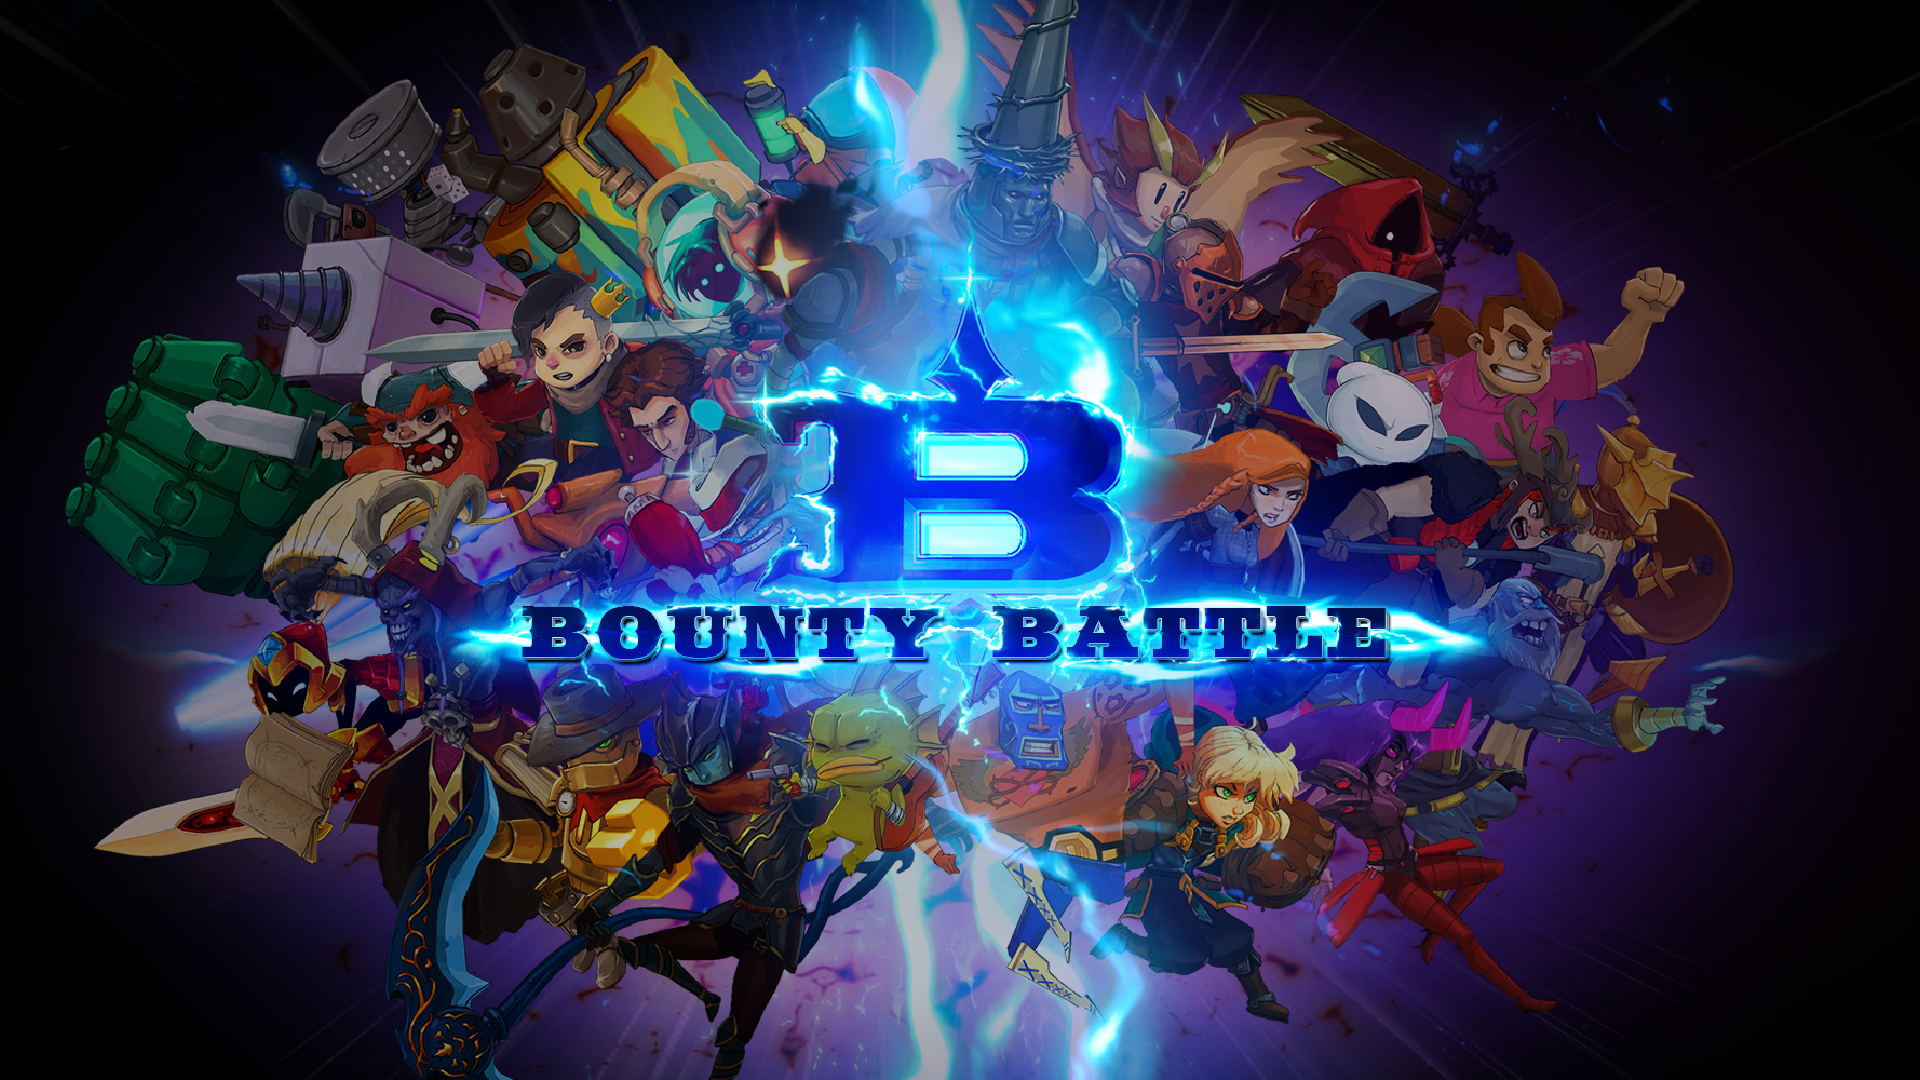 Bounty Battle: The indie brawler is postponed to an unknown date